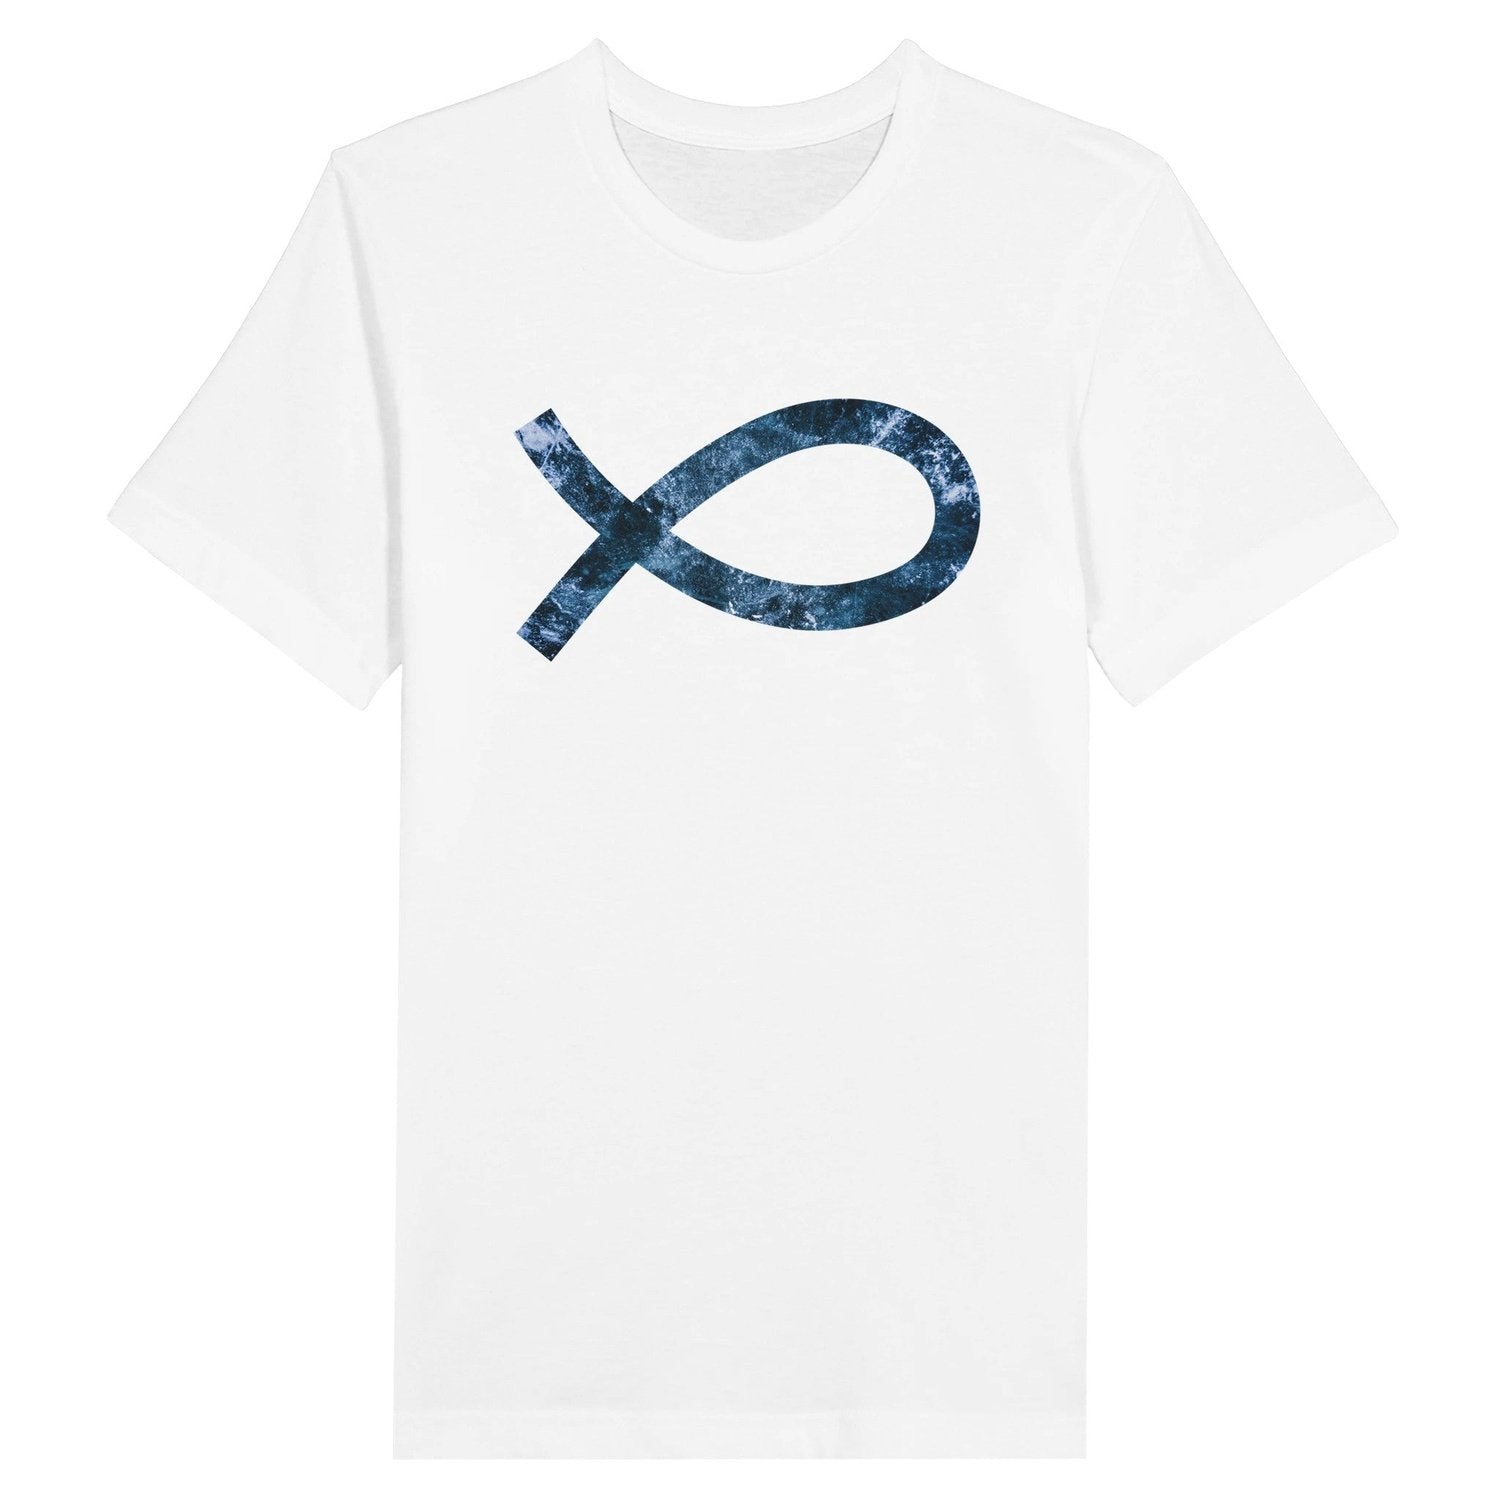 An image of The Christian Fish (Ichthys) | Premium Unisex Christian T-shirt available at 3rd Day Christian Clothing UK